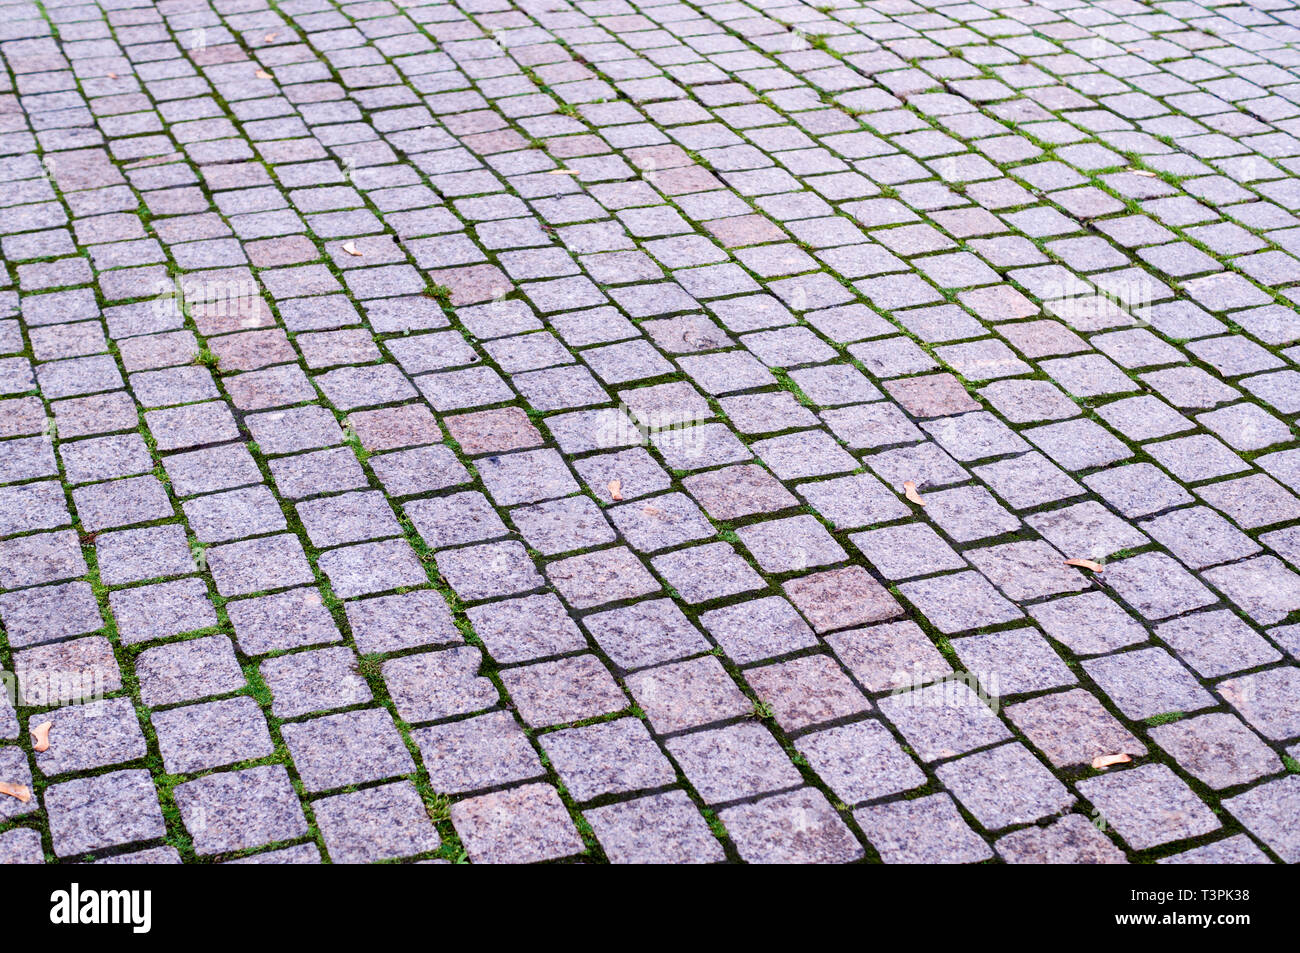 paved tiled sidewalk with perspective view. background, urban. Stock Photo